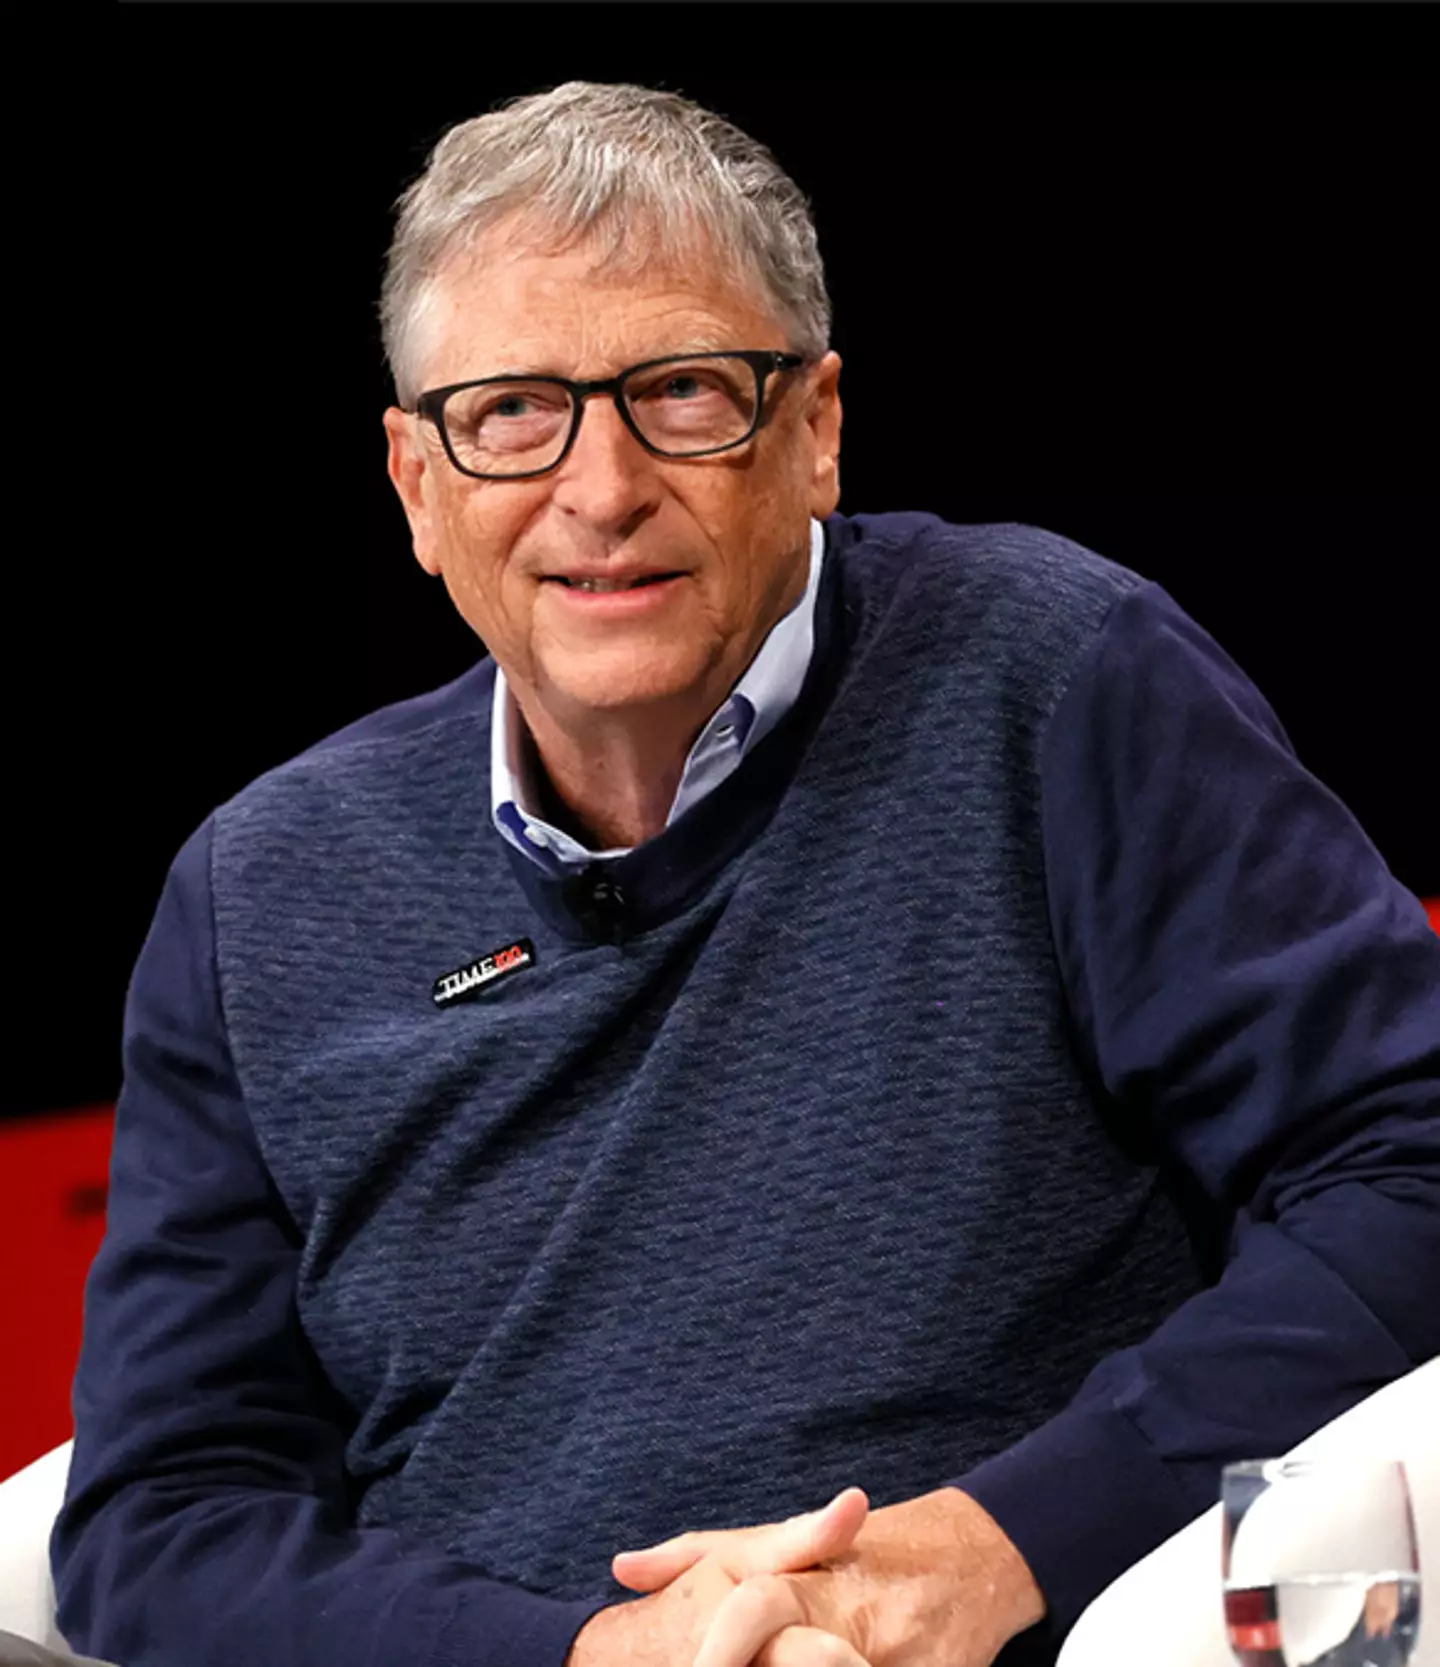 Bill Gates reflected on last year's predictions which changed when he found out he was going to be a grandparent / Jemal Countess / Stringer / Getty